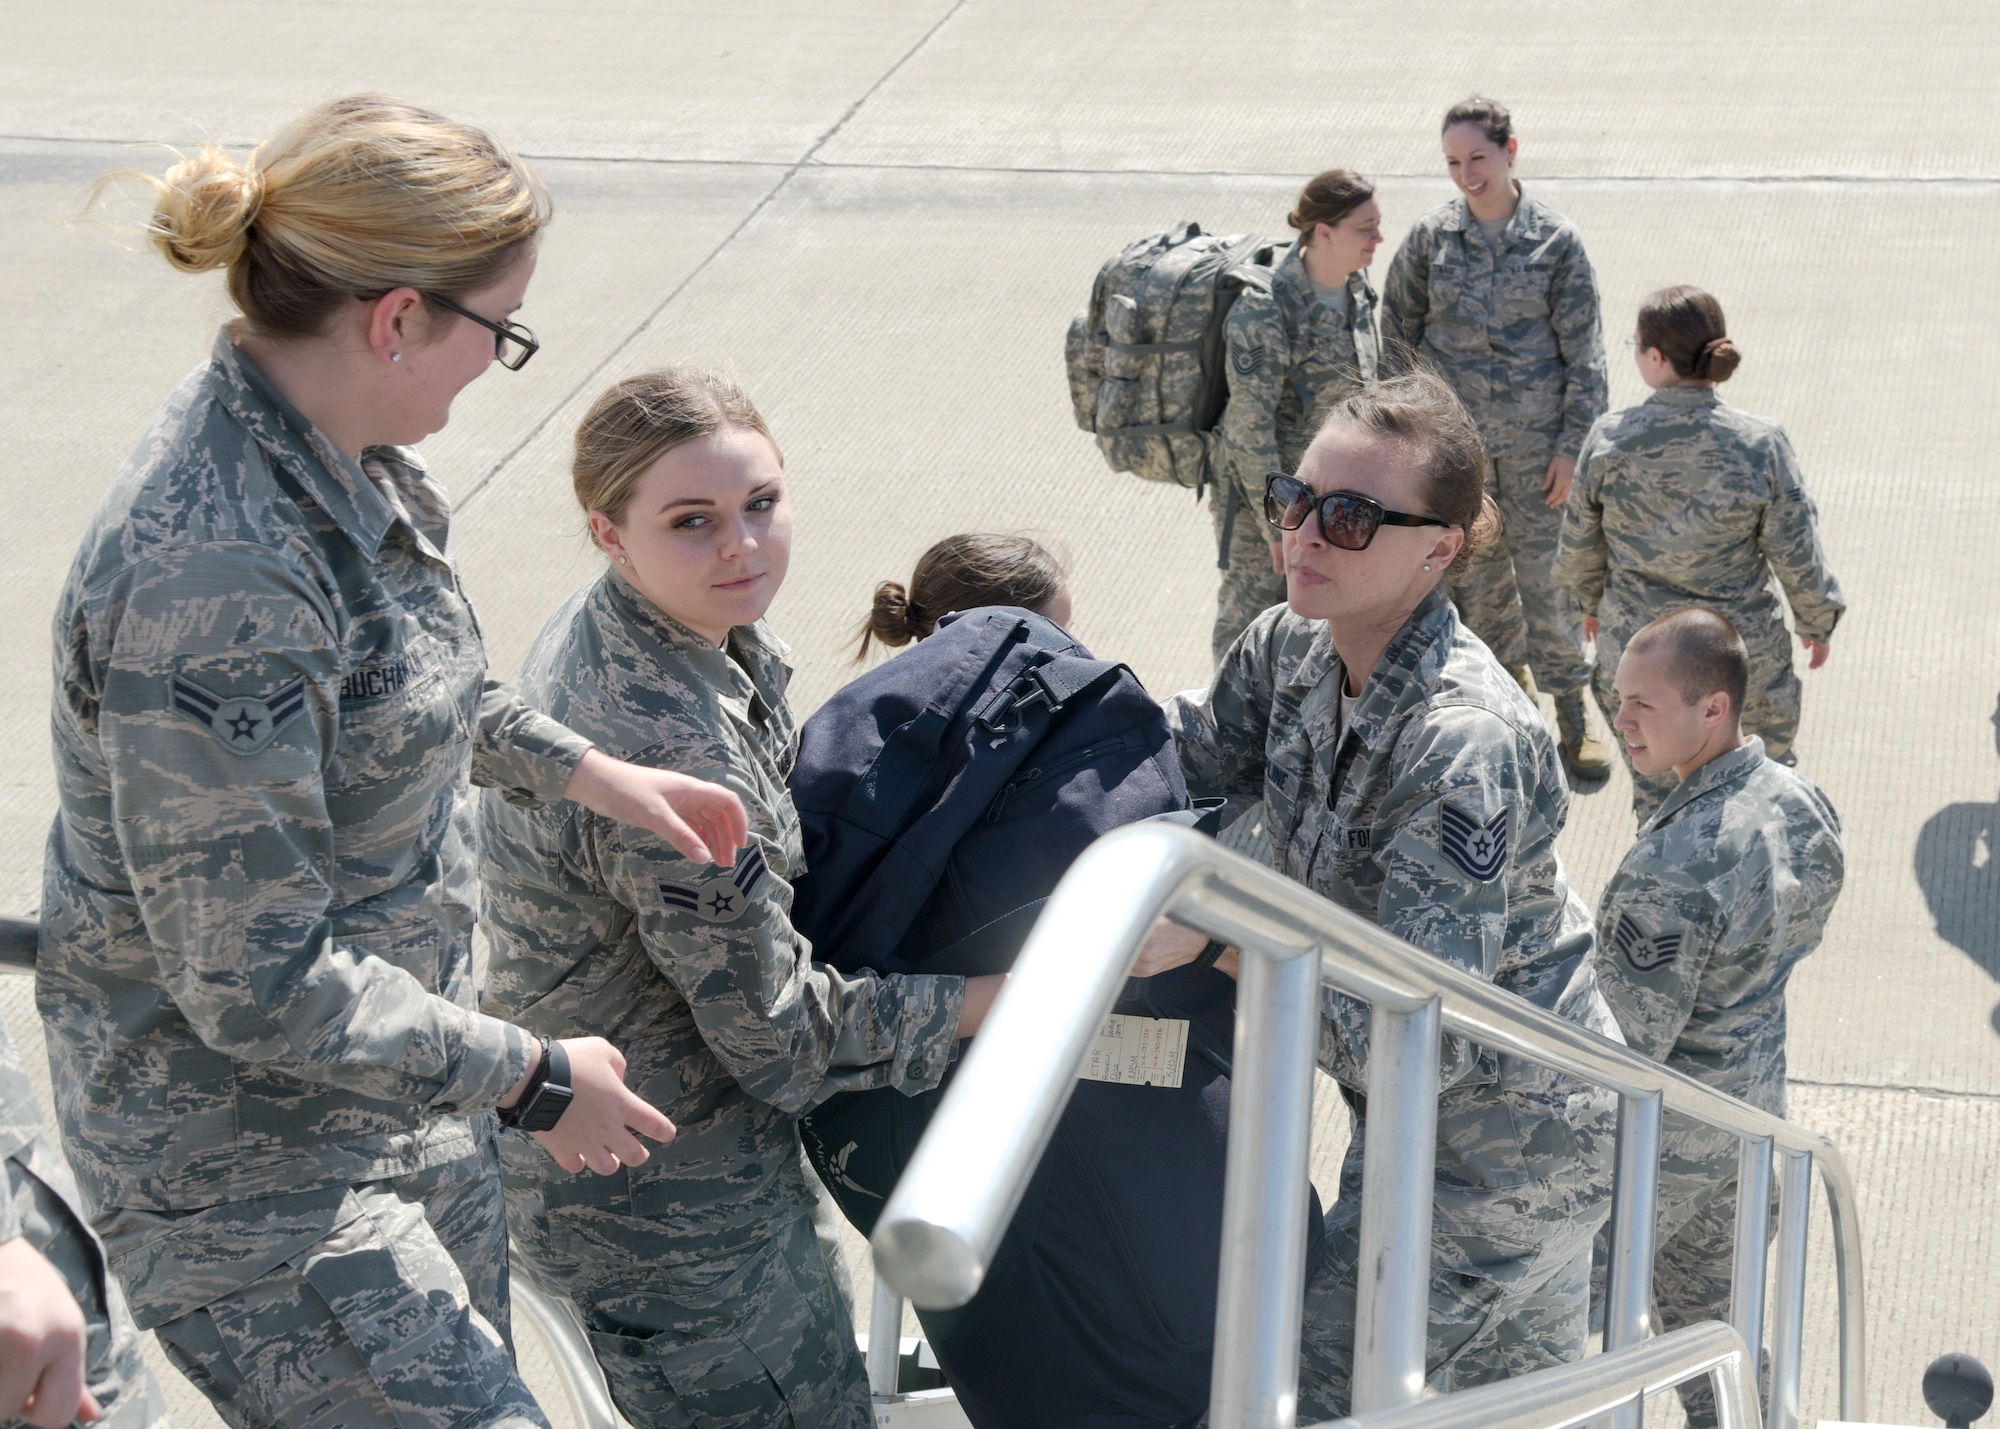 Airman 1st Class Tiana Buchanan, Airman 1st Class Lauren Ludka, and Tech. Sgt. Angela Krepline, all with the 115th Force Support Squadron, Truax Field, Wisconsin, load bags onto a KC-135 Stratotanker, assigned to the 128th Air Refueling Wing, General Mitchell Air National Guard Base, Wisconsin, before departing from Truax Field to Ramstein Air Base, Germany Aug. 29, 2018. The 115th FSS is going TDY to Ramstein for approximately two-weeks as part of a movement for training mission. (U.S. Air National Guard photo by Airman 1st Class Cameron Lewis)